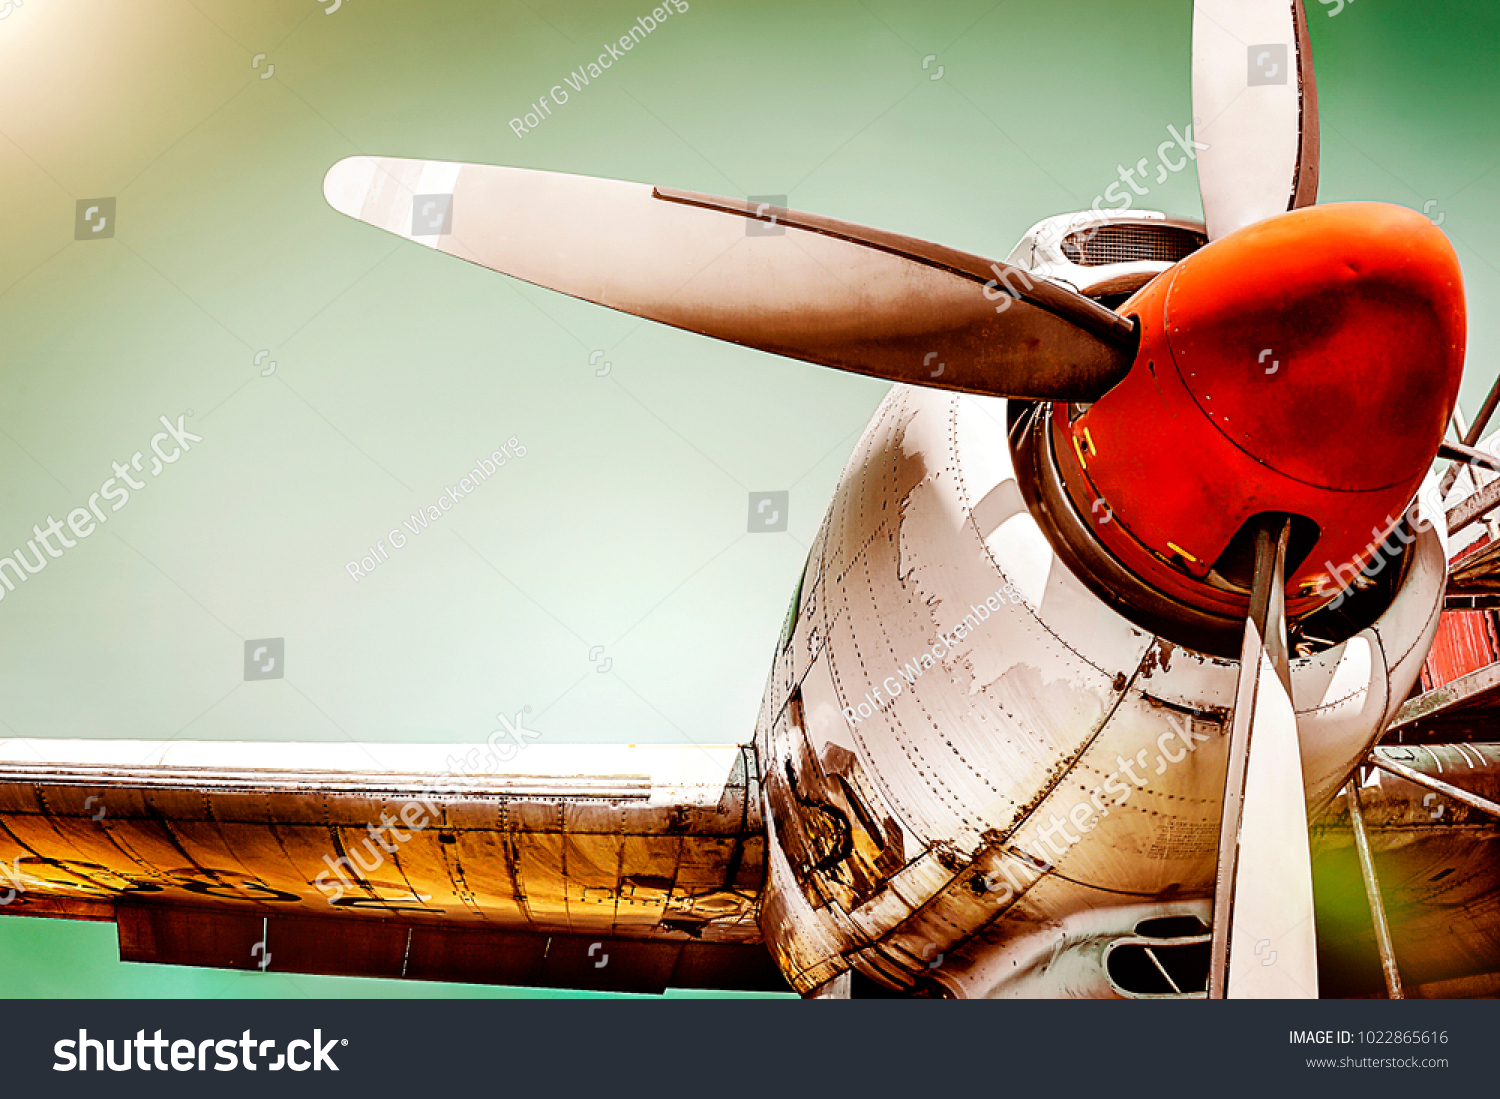 Old airplane turboprop engine with propeller blades, parts of wings and aircraft fuselage - concept closeup  historic vintage plane travel flight dramatic look retro style propeller plane aircraft #1022865616